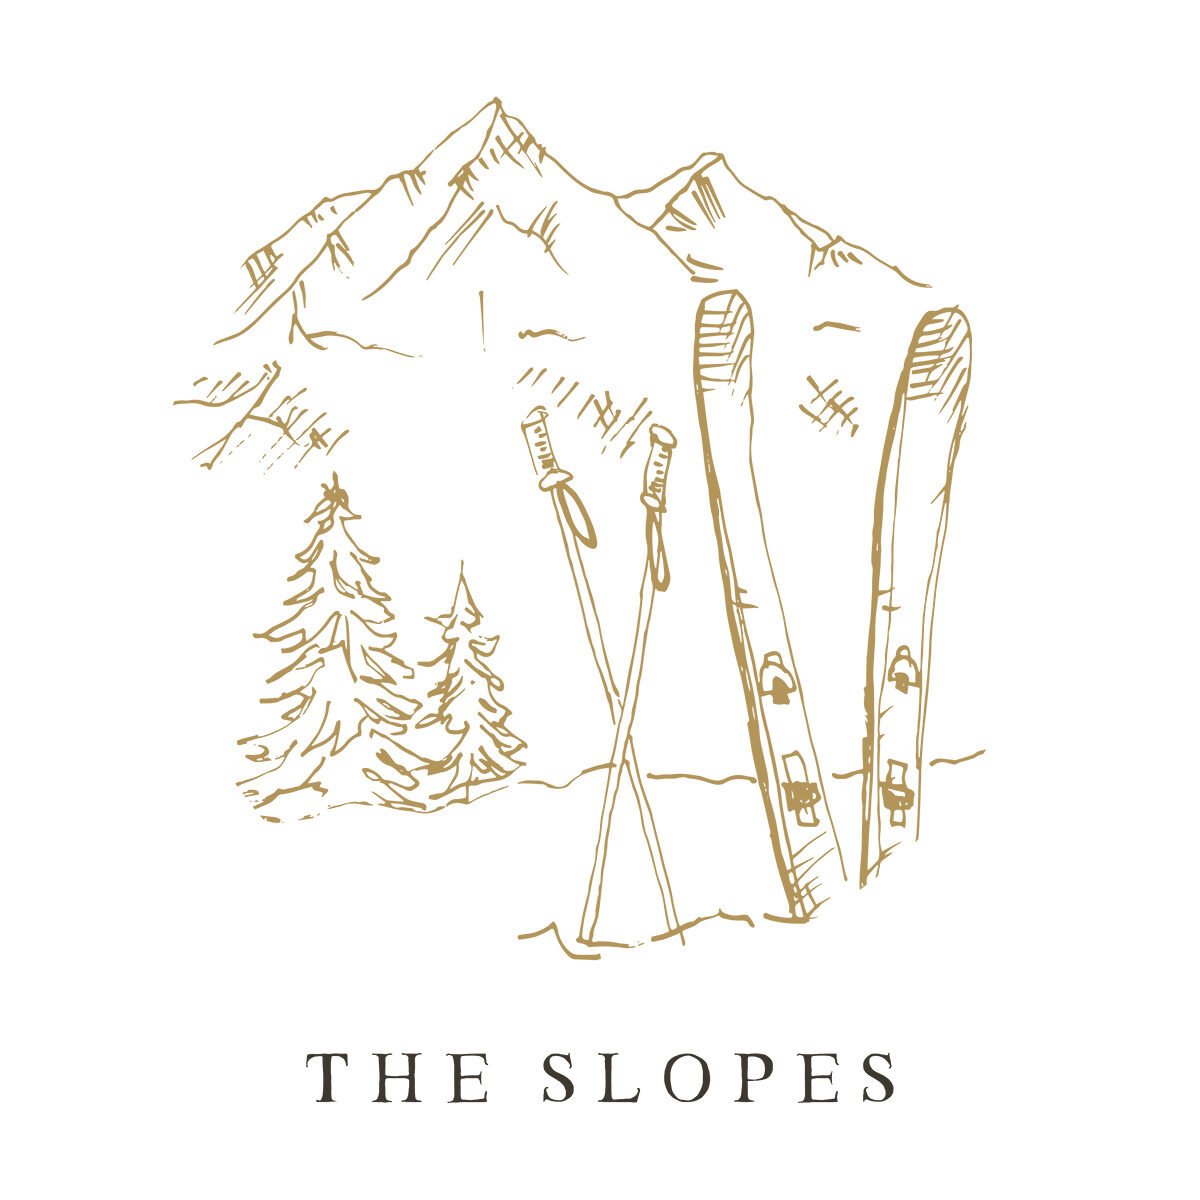 lindsay-mcghee-designs-the-whistler-elopement-company-illustration-the-slopes